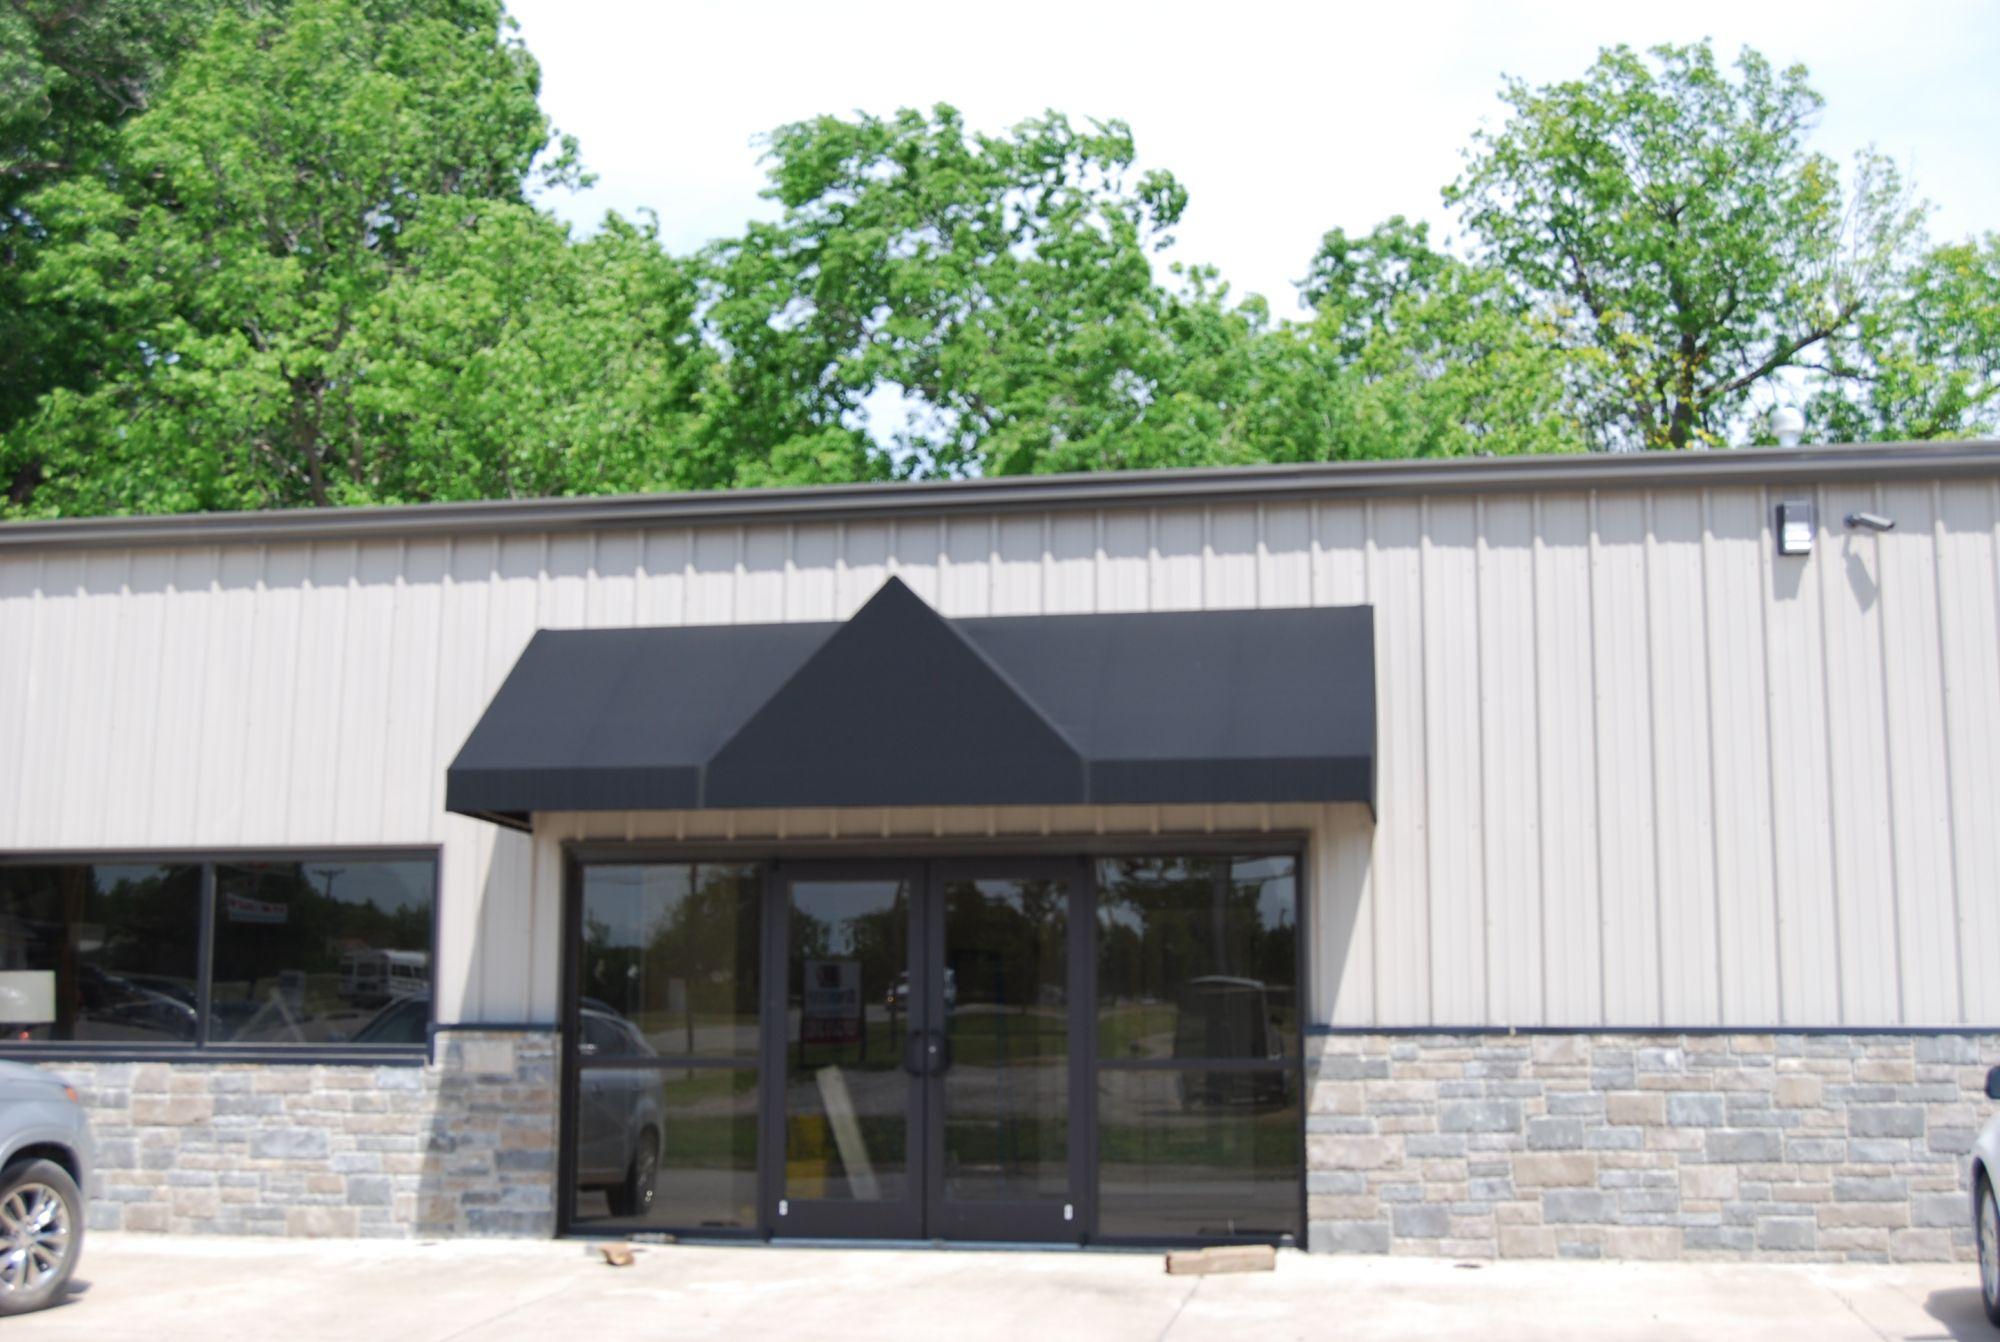 Commercial Steel Buildings Wainscot With Rock Entrance